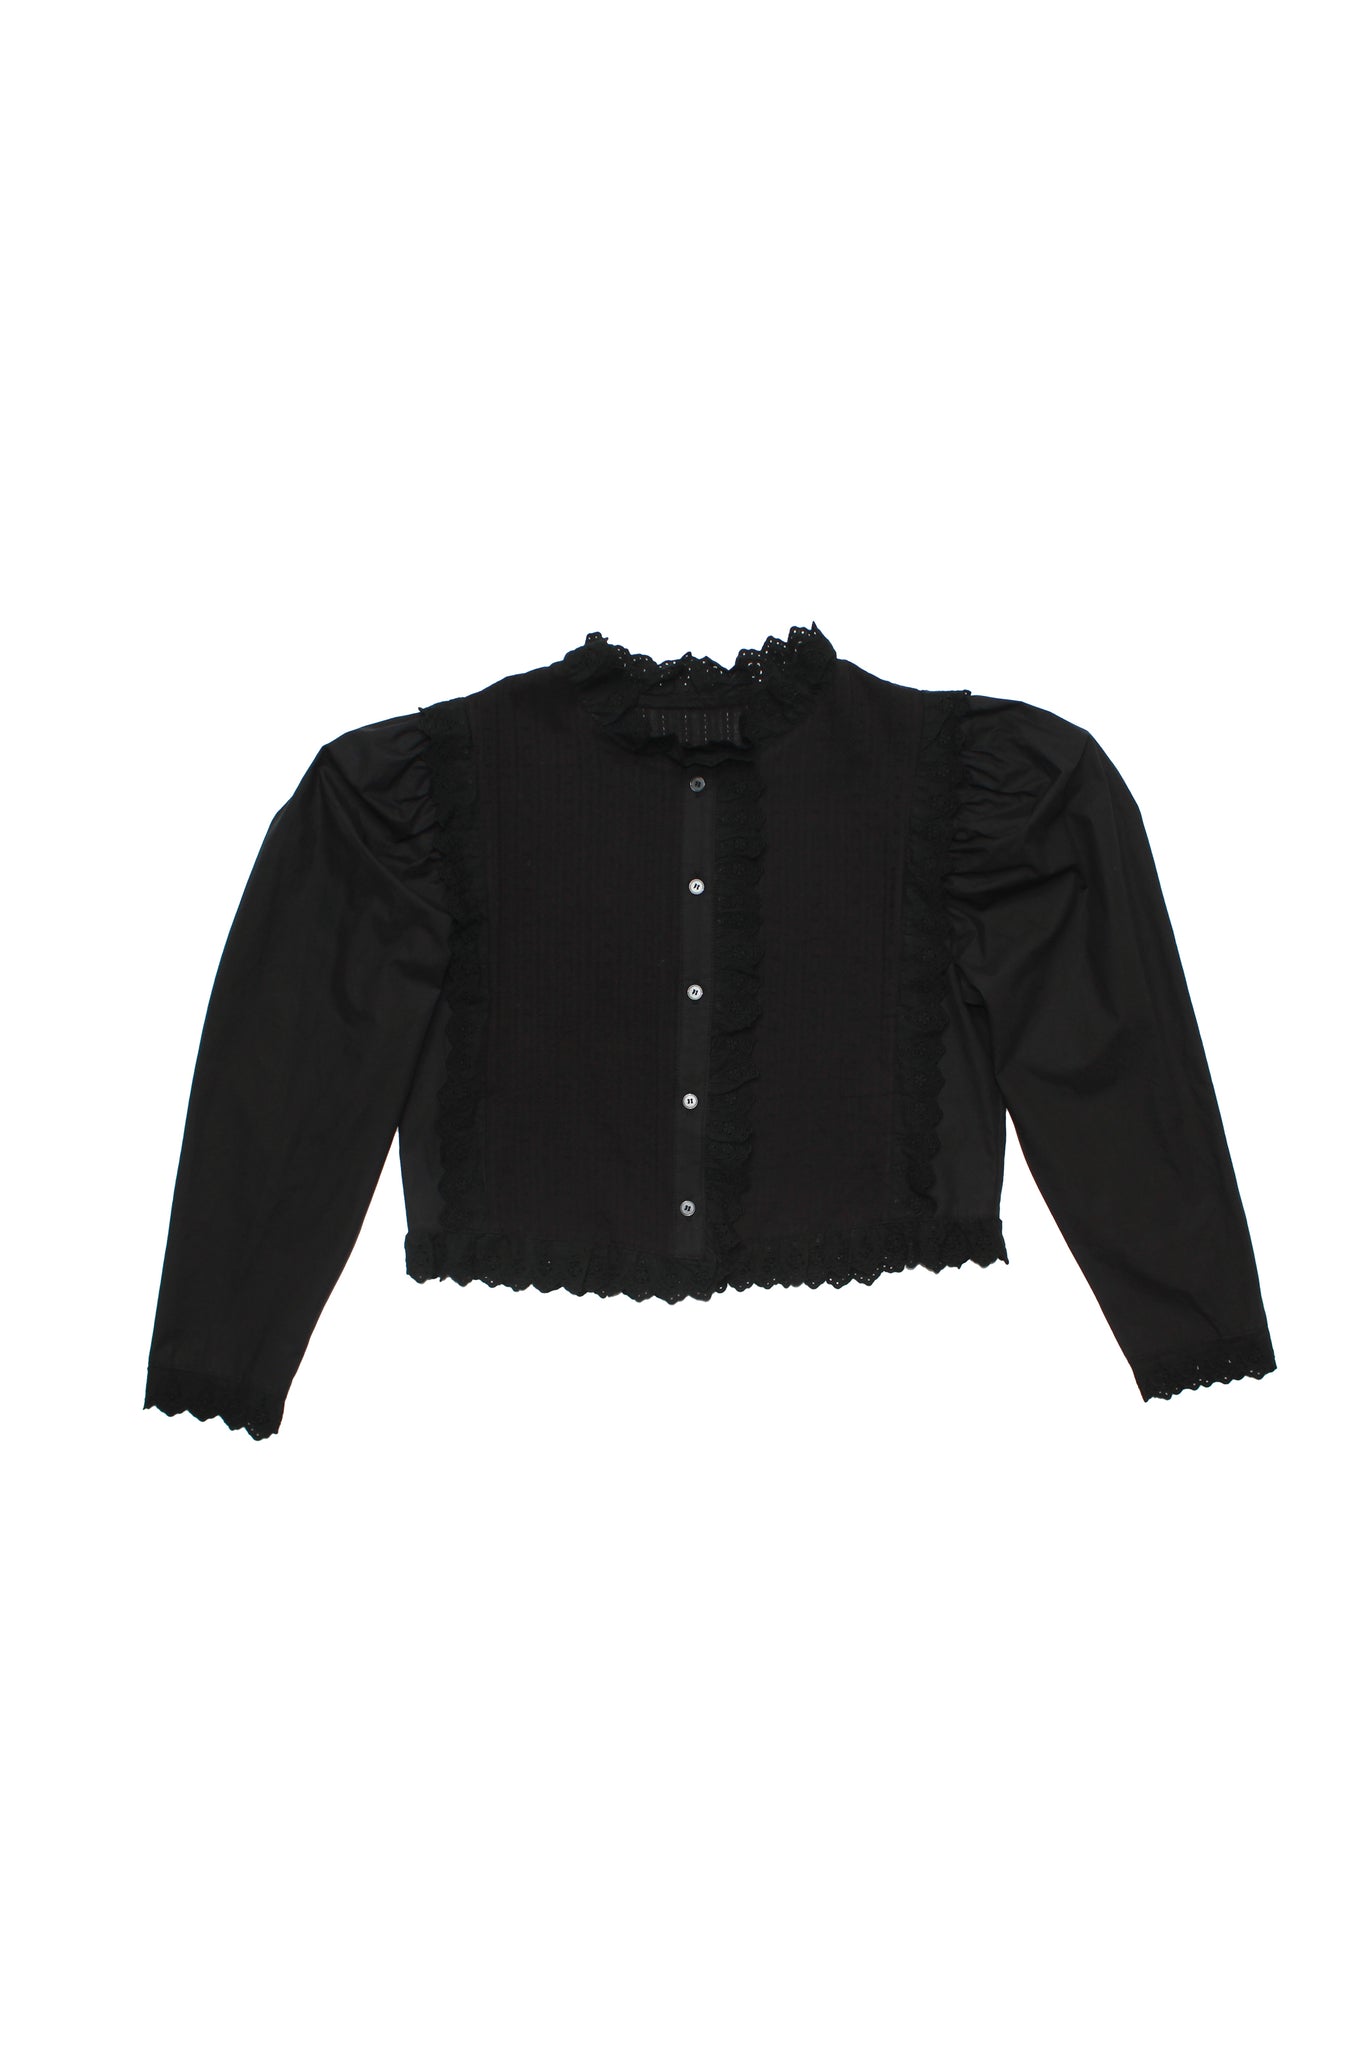 Sweet Lace Shirts in Black